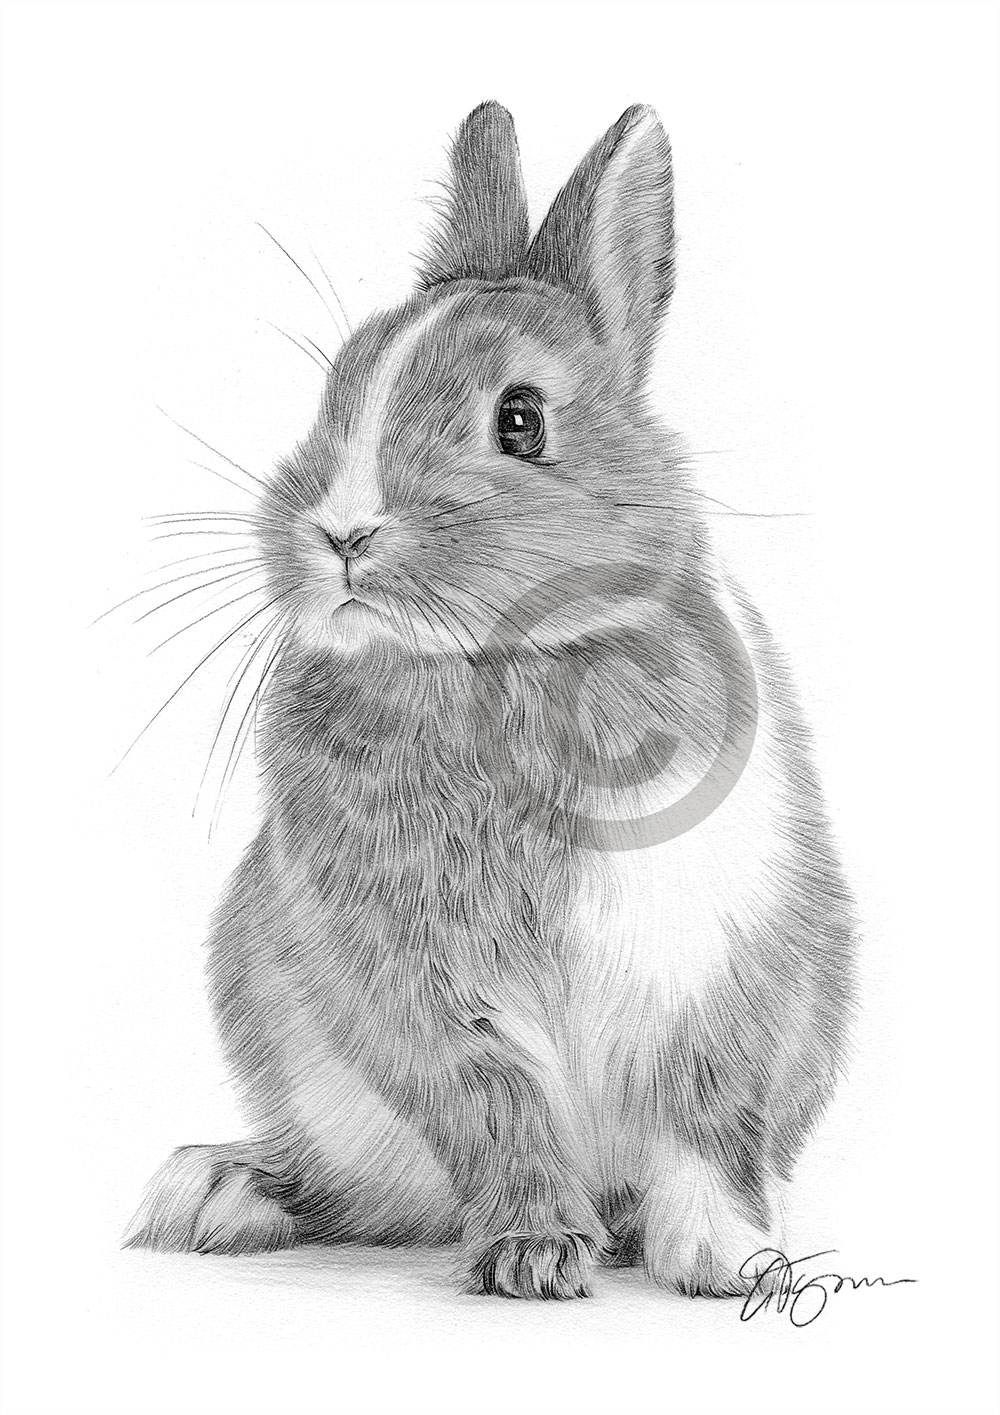 RABBIT - animal pencil drawing artwork print - A4 only signed by artist